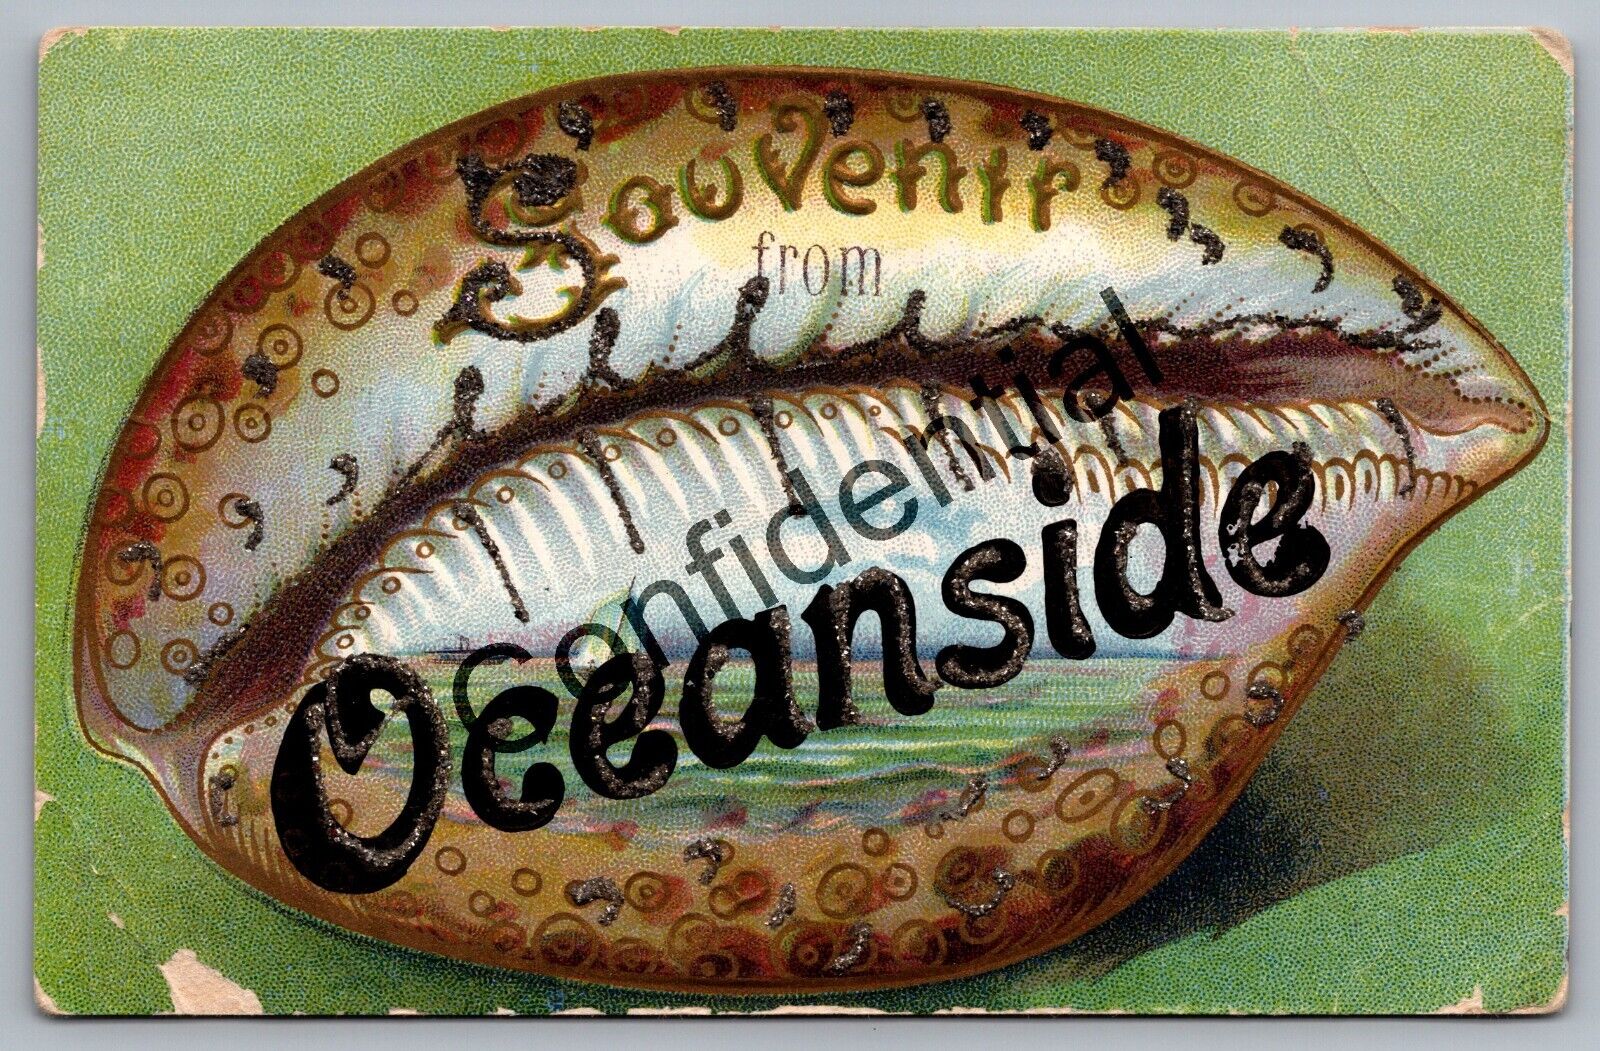 1912 Souvenir From Oceanside CA Conch Shell Glitter Decorated Postcard M60